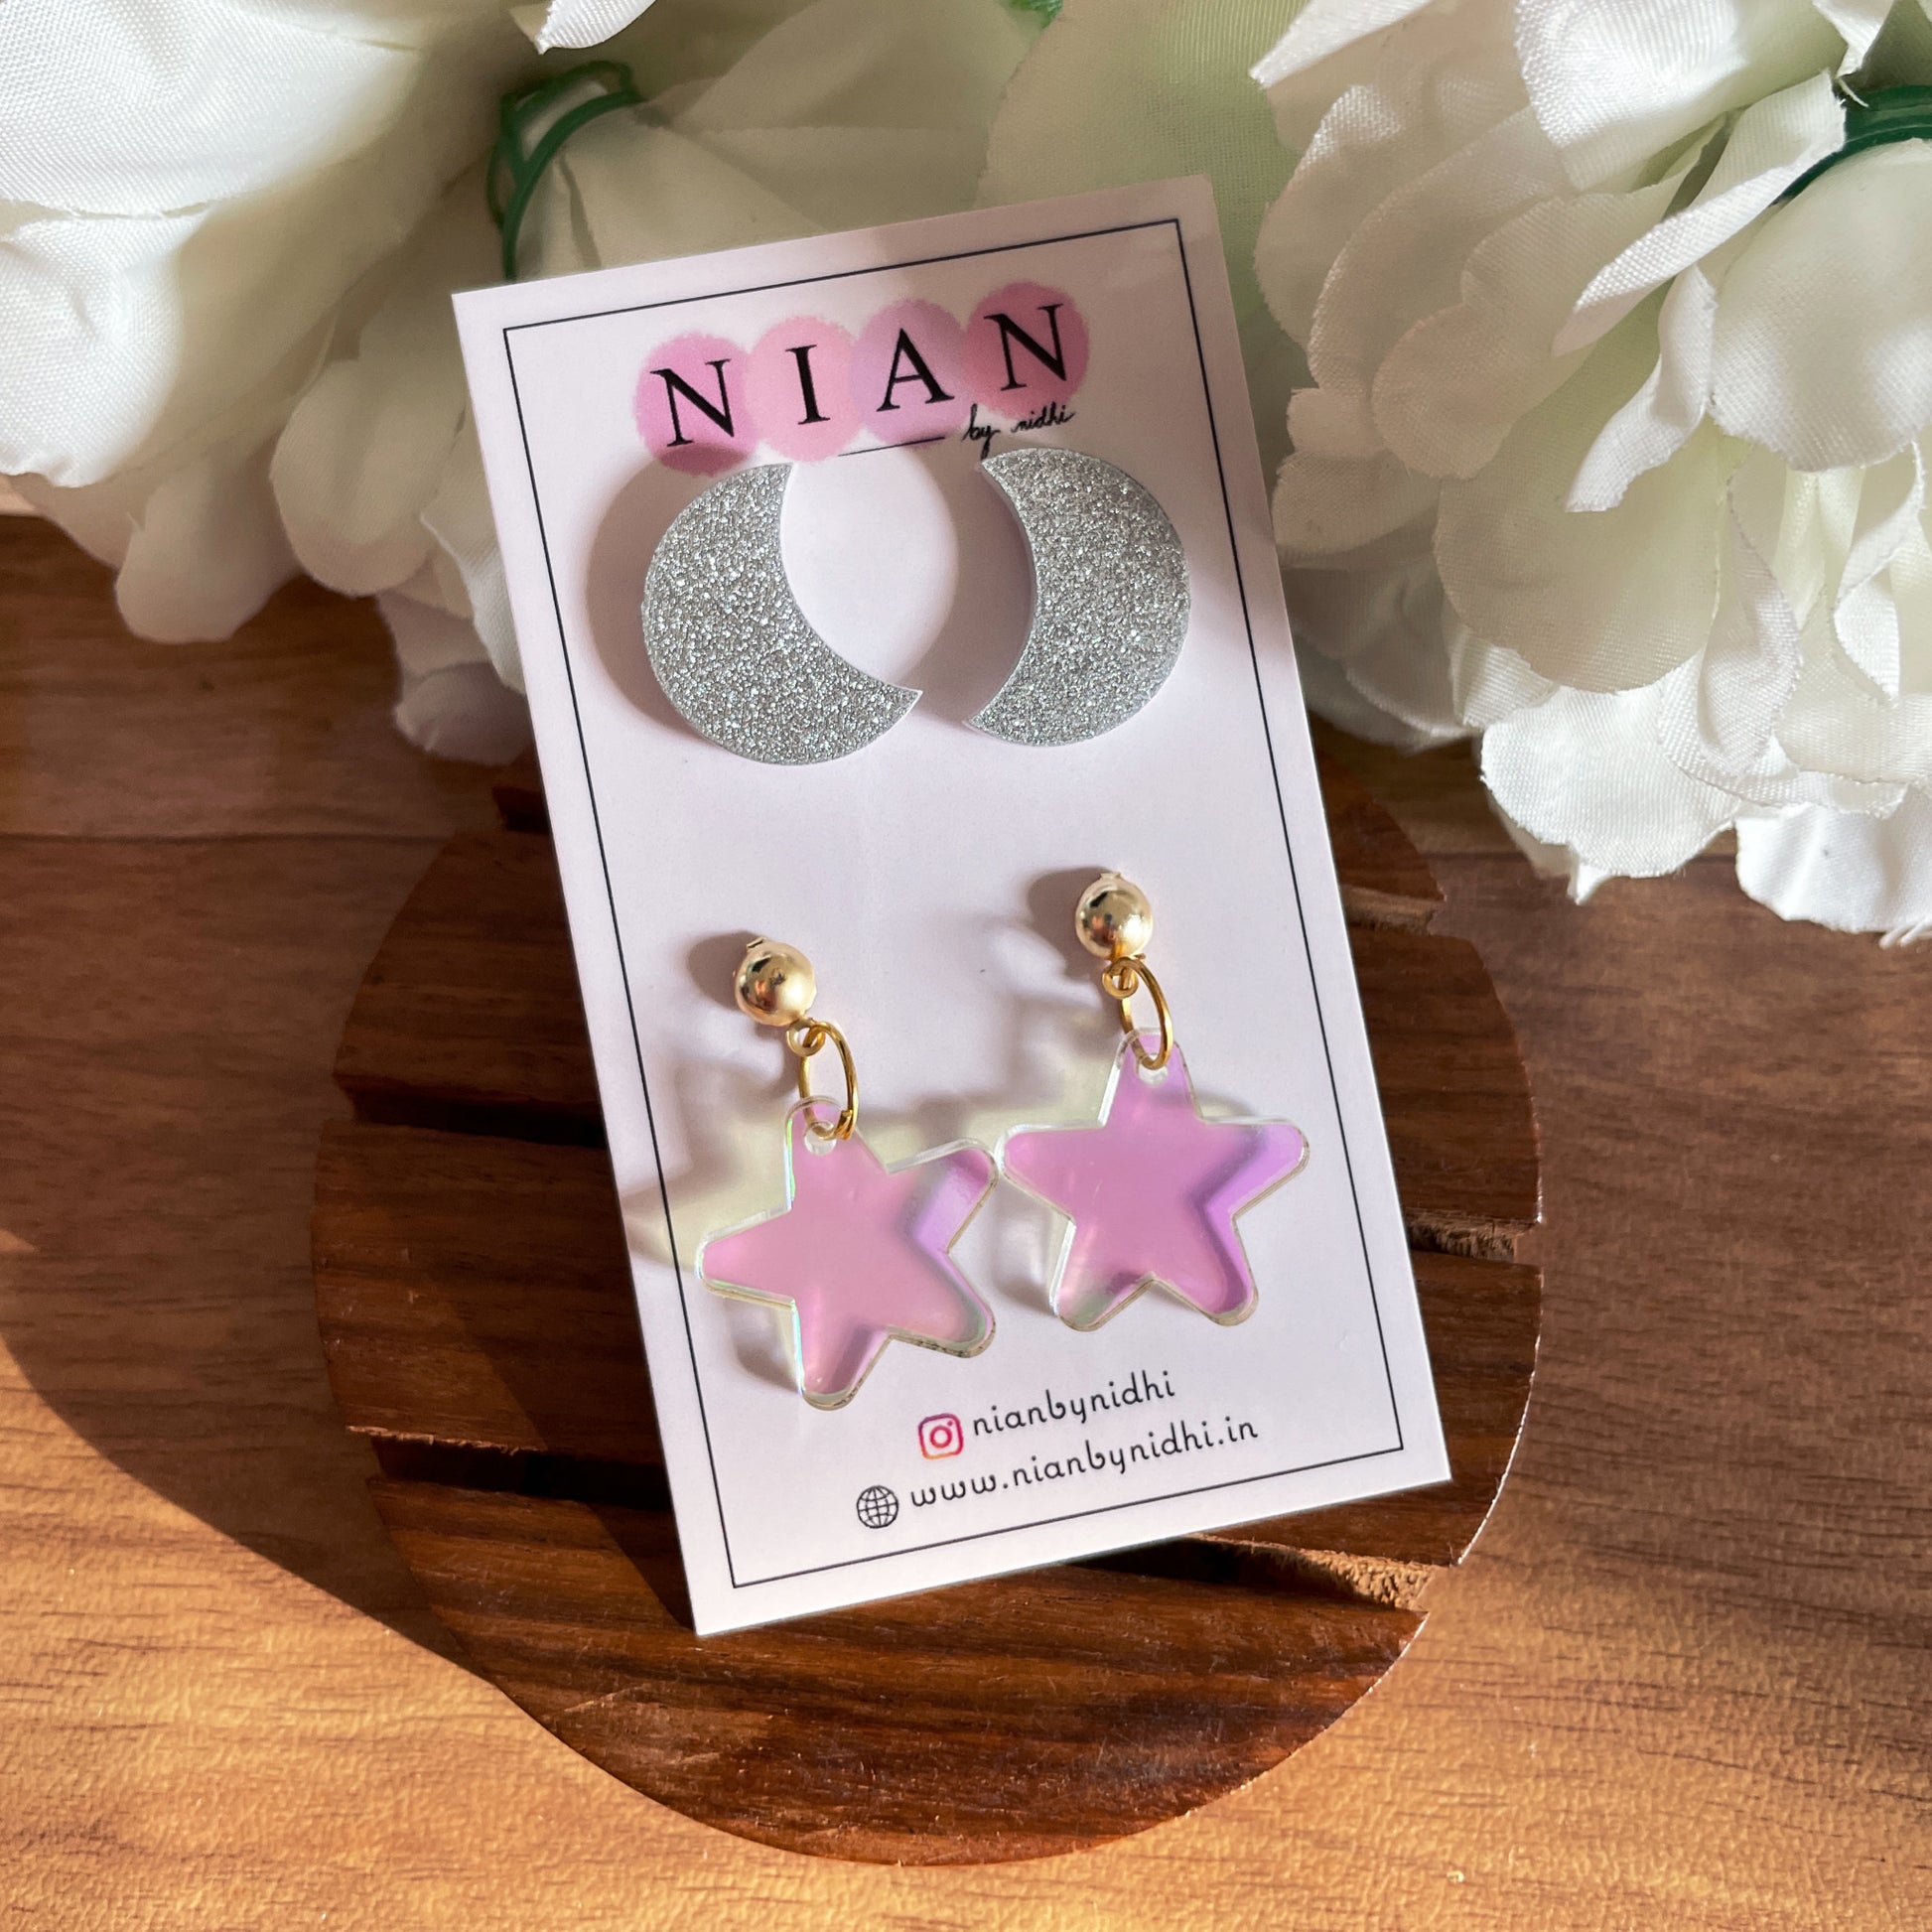 Nightsky Studs (Set of 2) - consisting Moon Studs and Star Studs - Shimmer Silver and Holographic colors - Nian by Nidhi - in a brown and white background, placed on Nian by Nidhi earring card